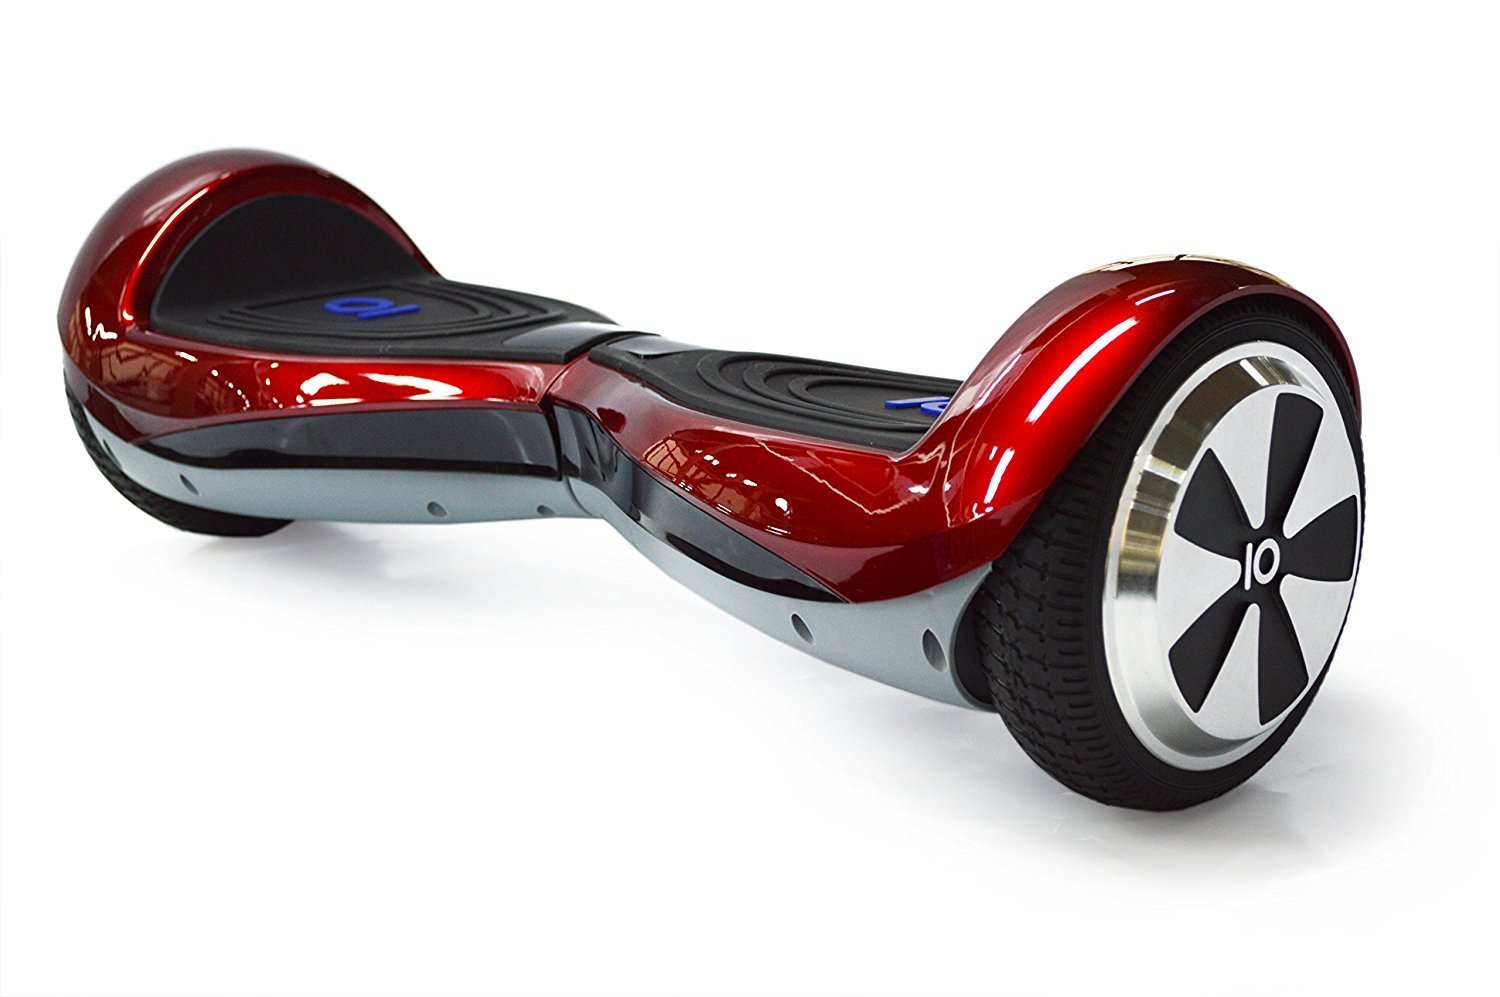 65 inch selfbalancing smart electric scooter classic segway